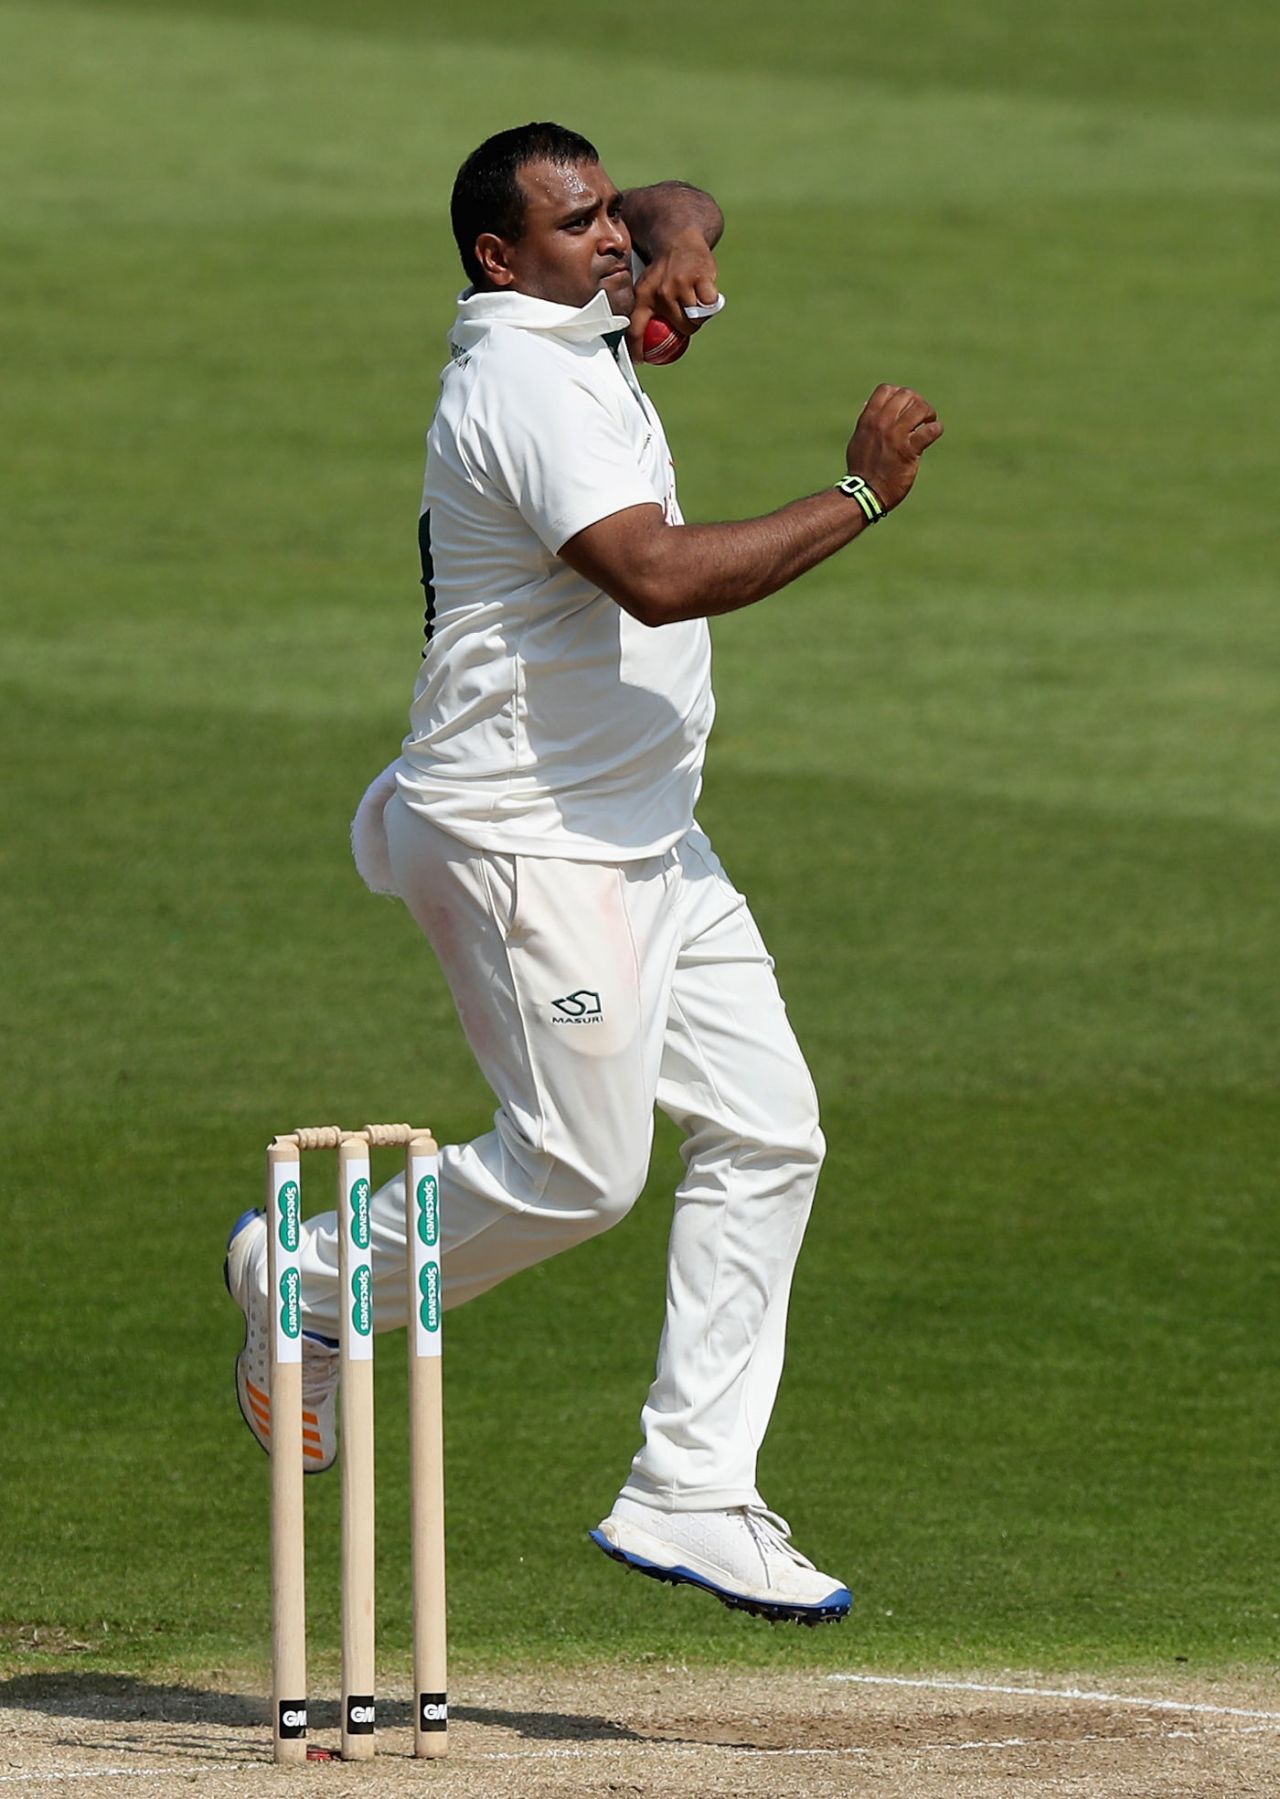 Samit Patel in action for Nottinghamshire, Notts v Lancashire, Specsavers Championship Division One, May 11, 2018